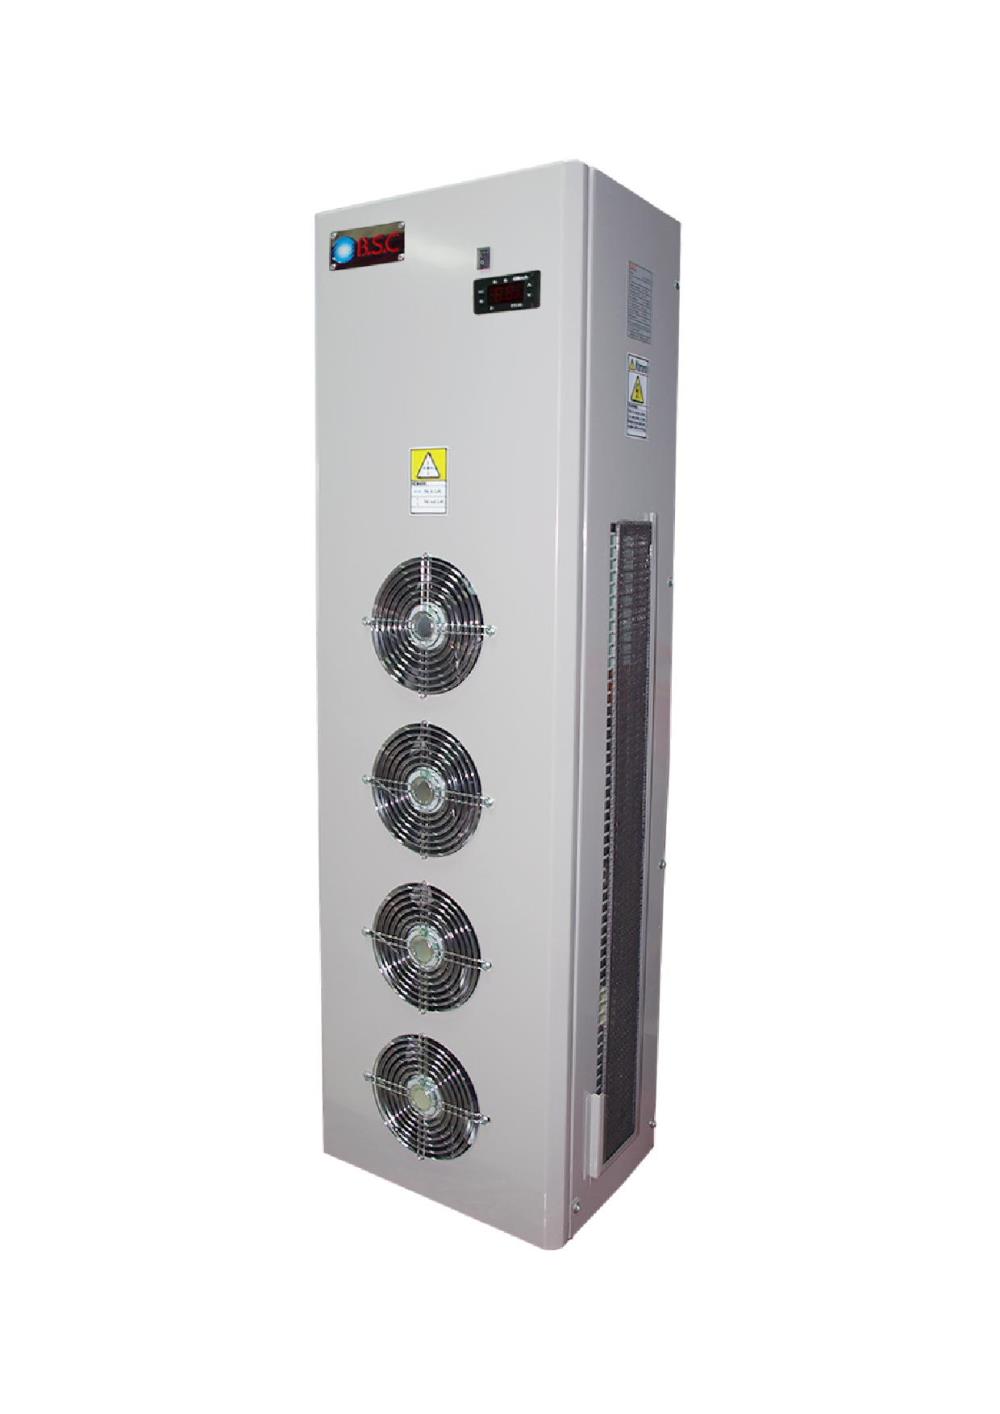 Air Condition : BSC2500-C,แอร์ตู้คอนโทรล,BSC,Plant and Facility Equipment/HVAC/Air Conditioning